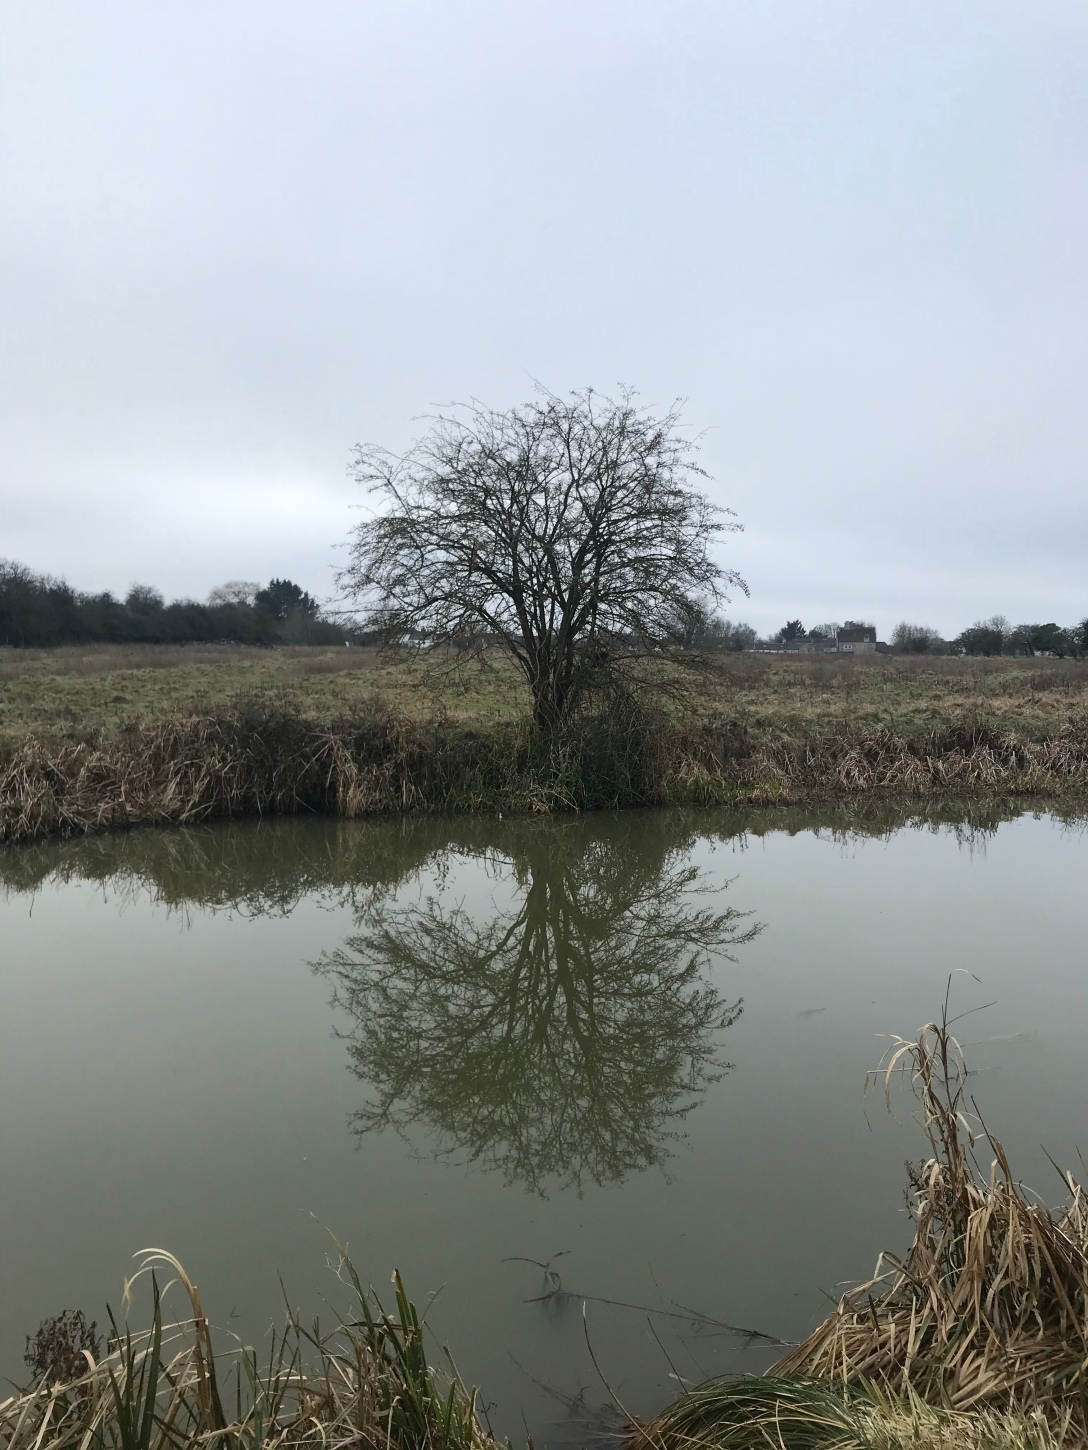 an image of a tree photographed by a still canal so that the tree's reflection is clearly visible